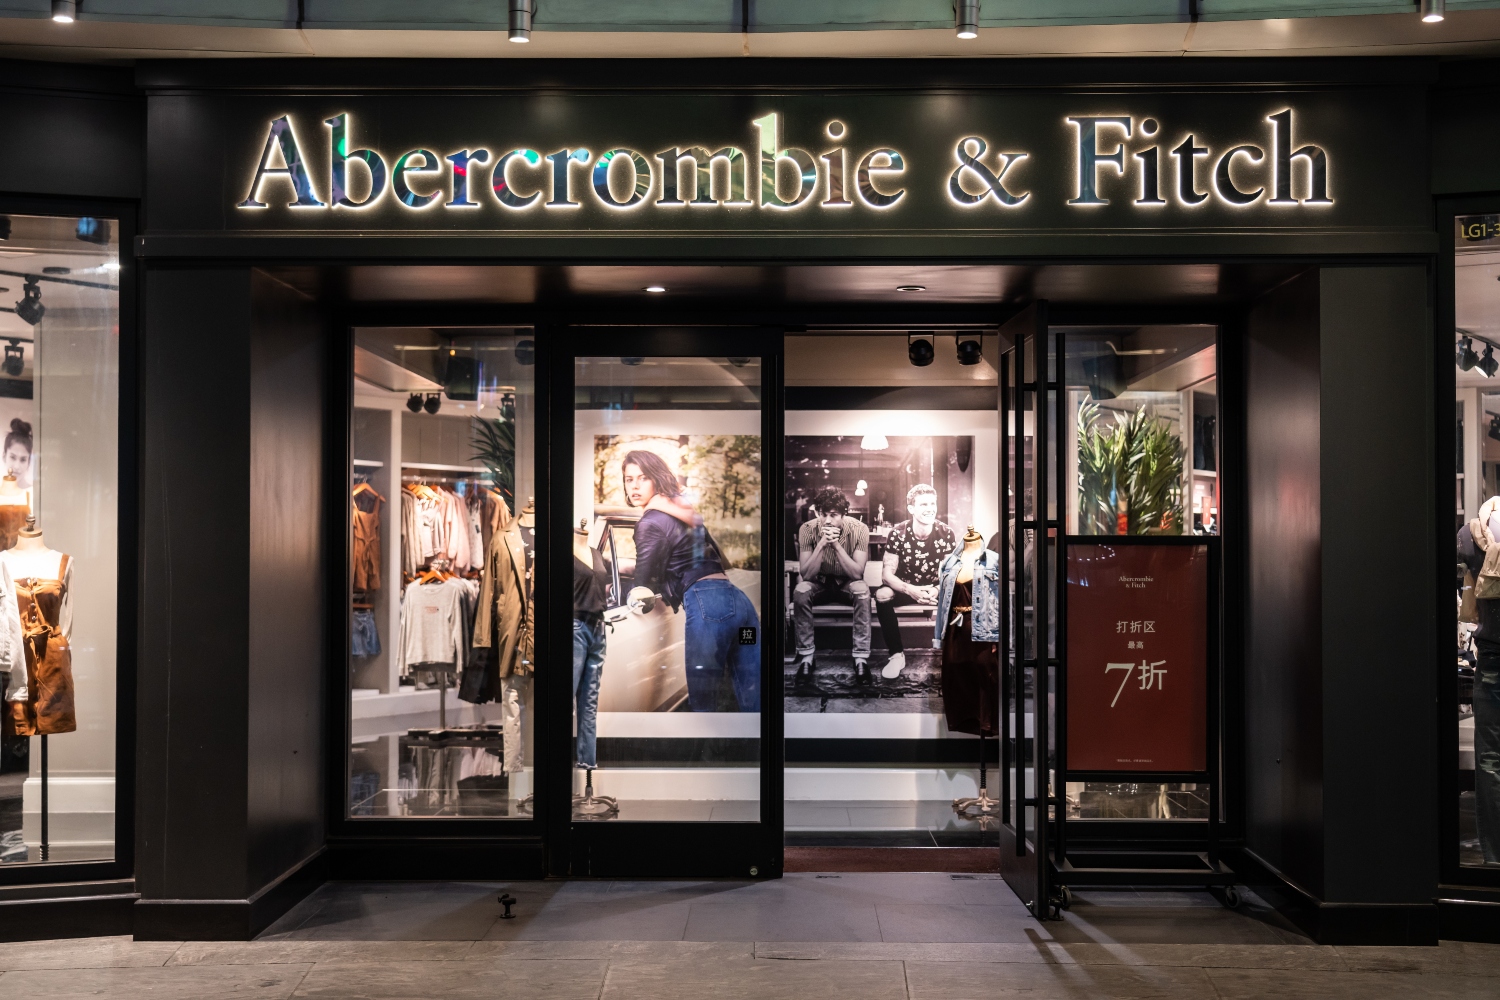 Abercrombie & Fitch Documentary Traces Brand's Downfall - InsideHook